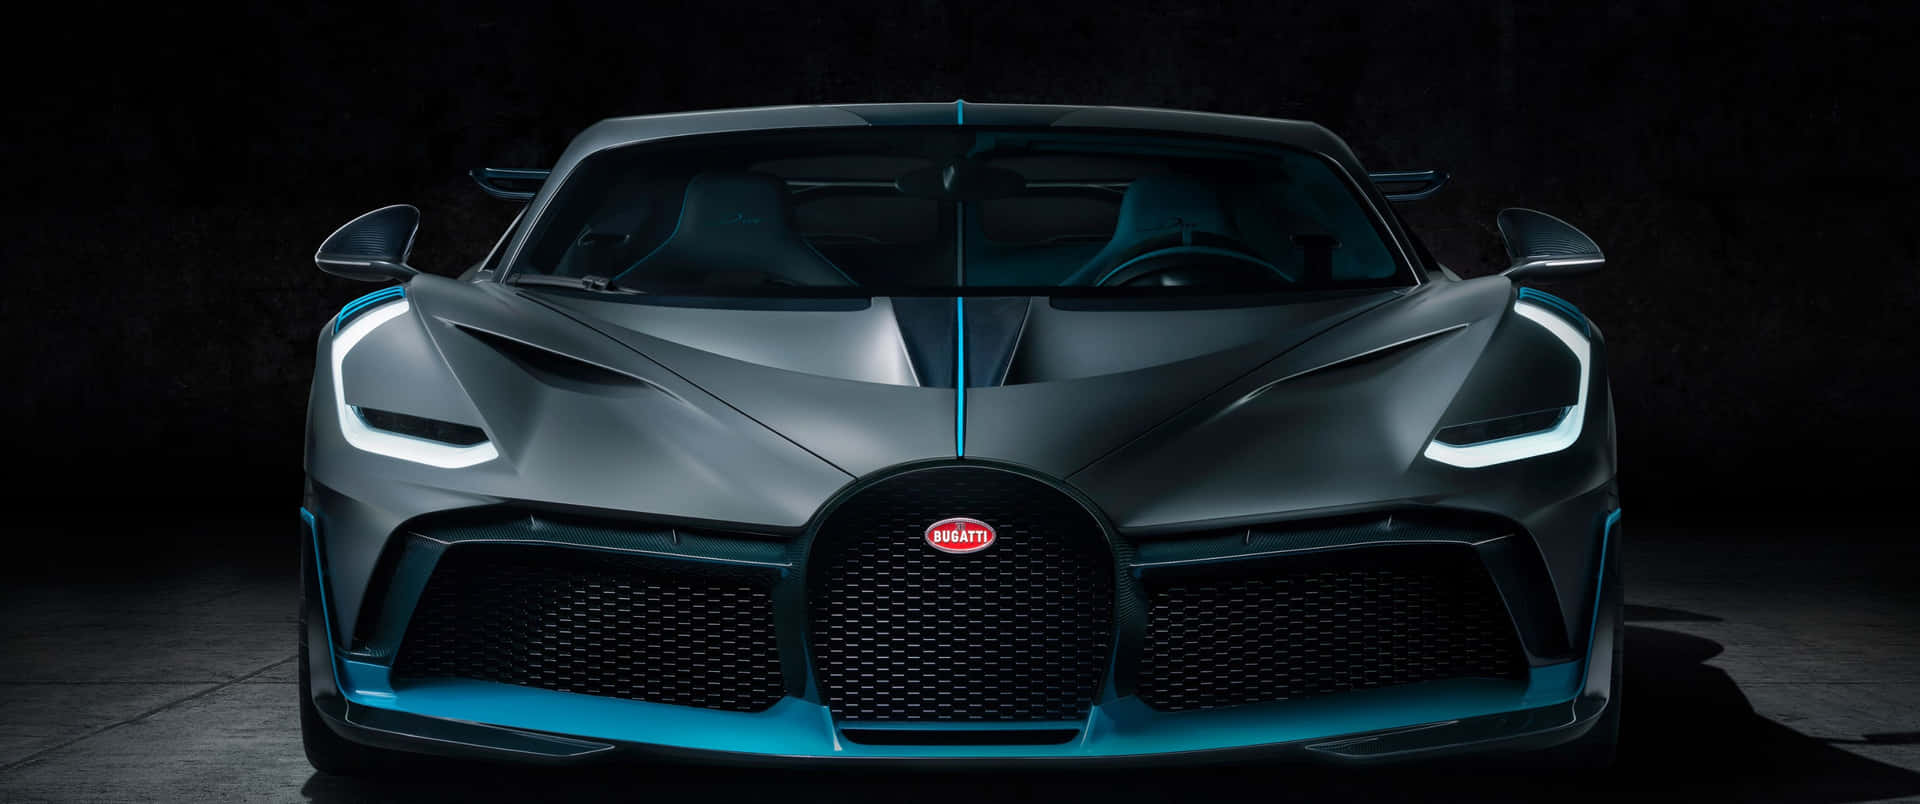 Speed and style come together in this amazing Bugatti.